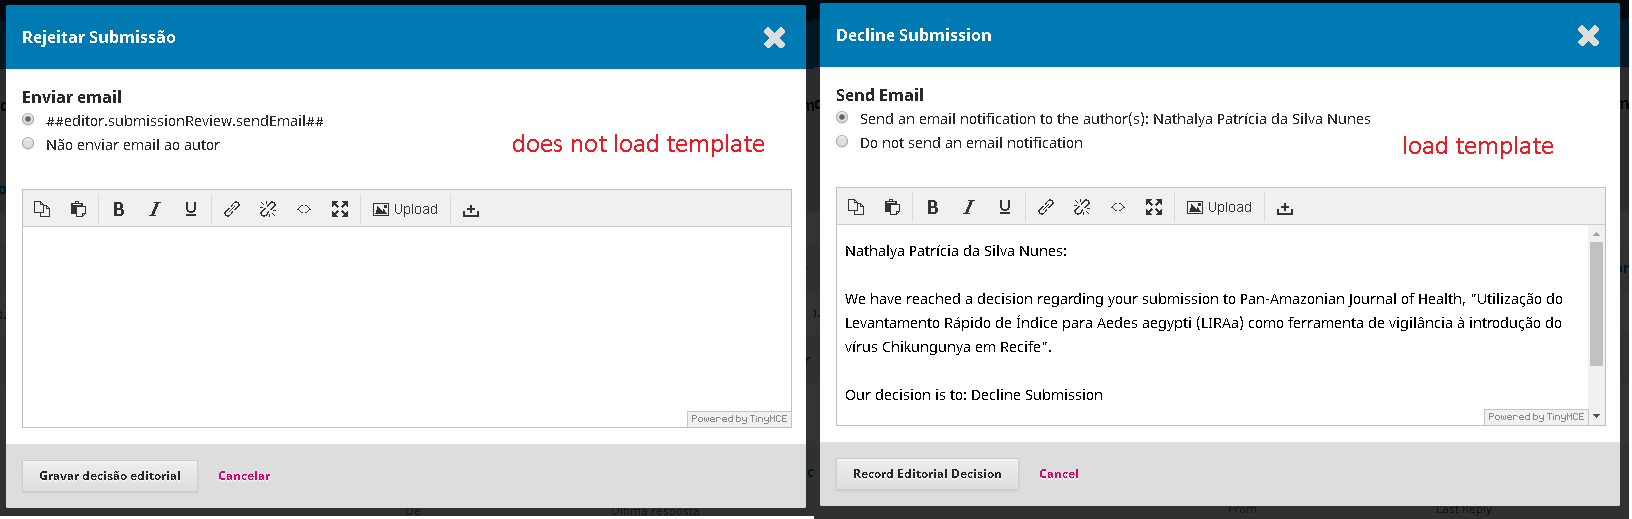 template_email